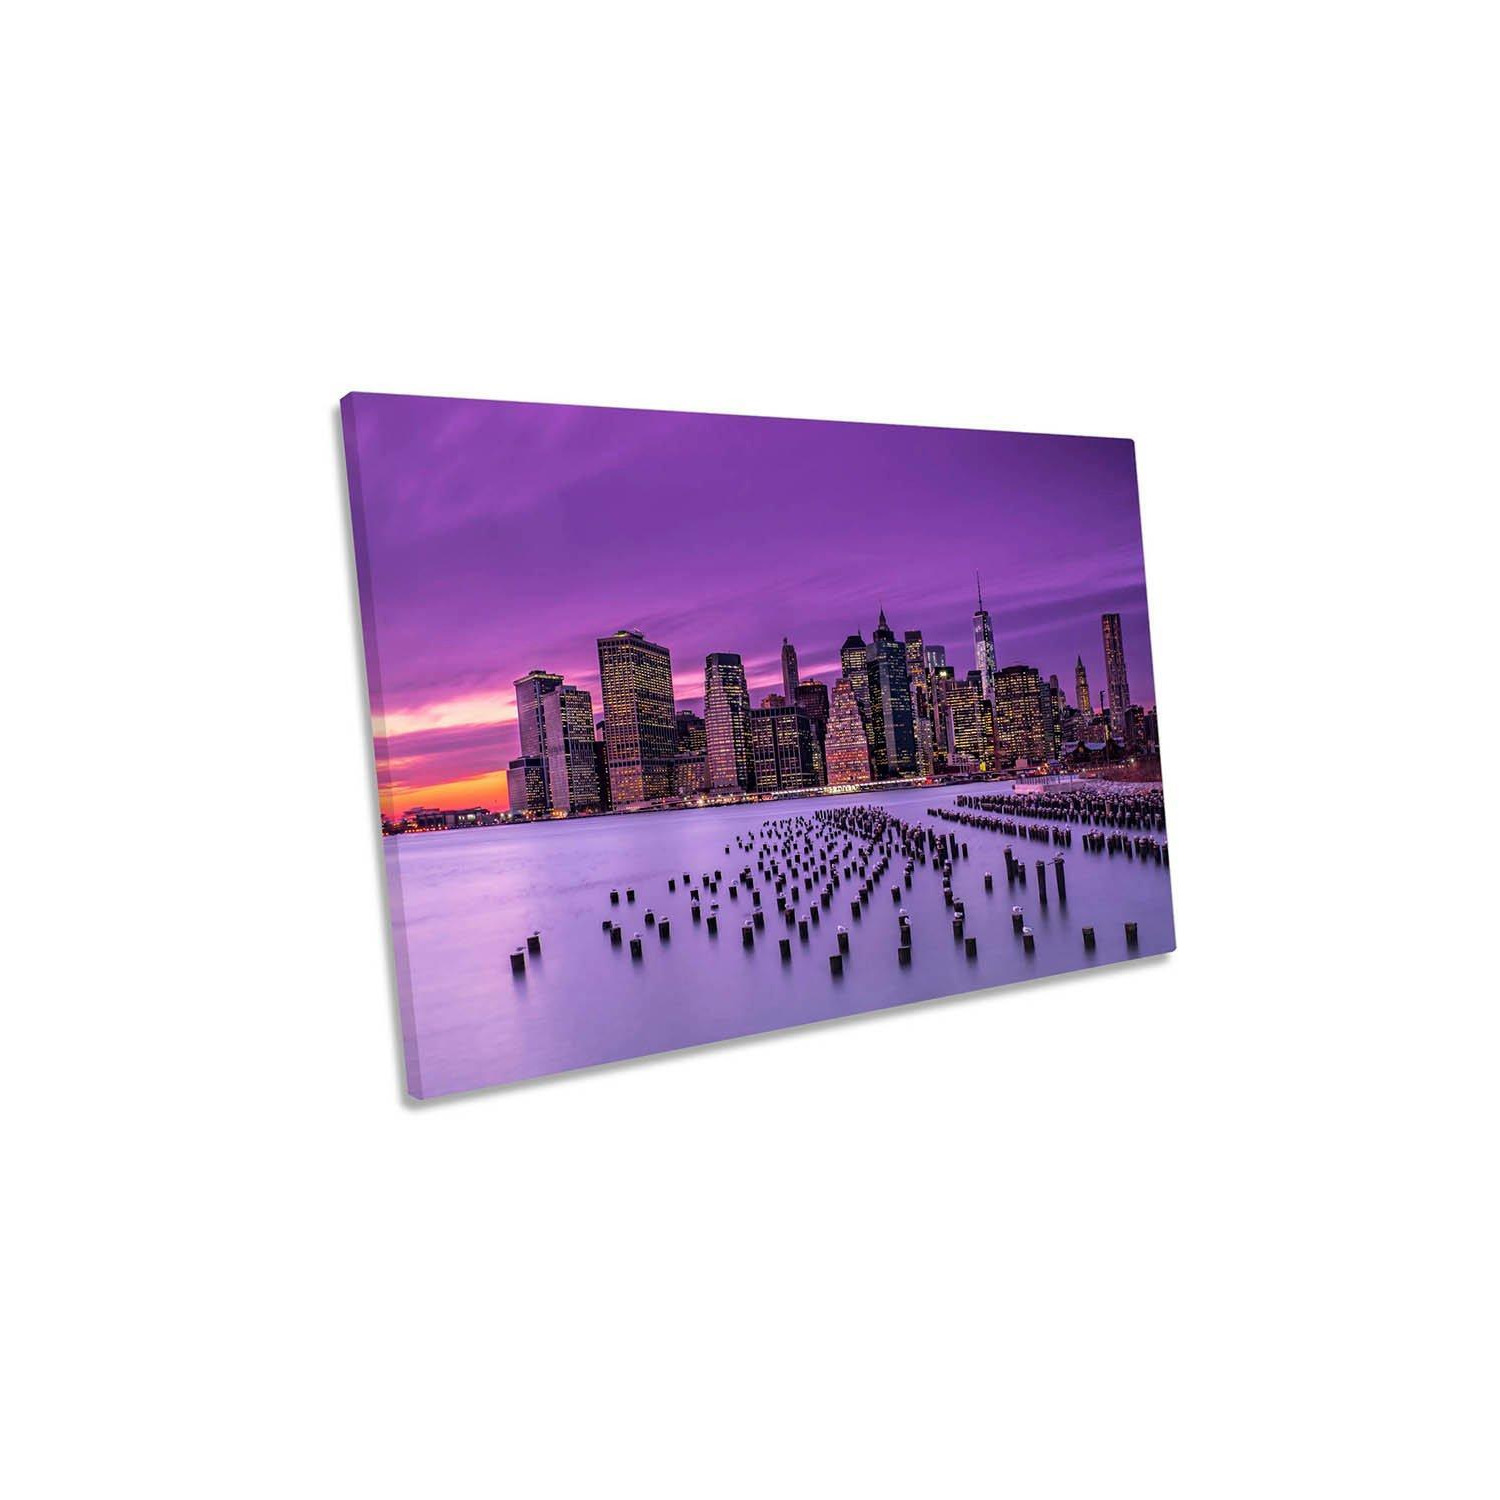 New York City Violet Sunset Canvas Wall Art Picture Print - image 1